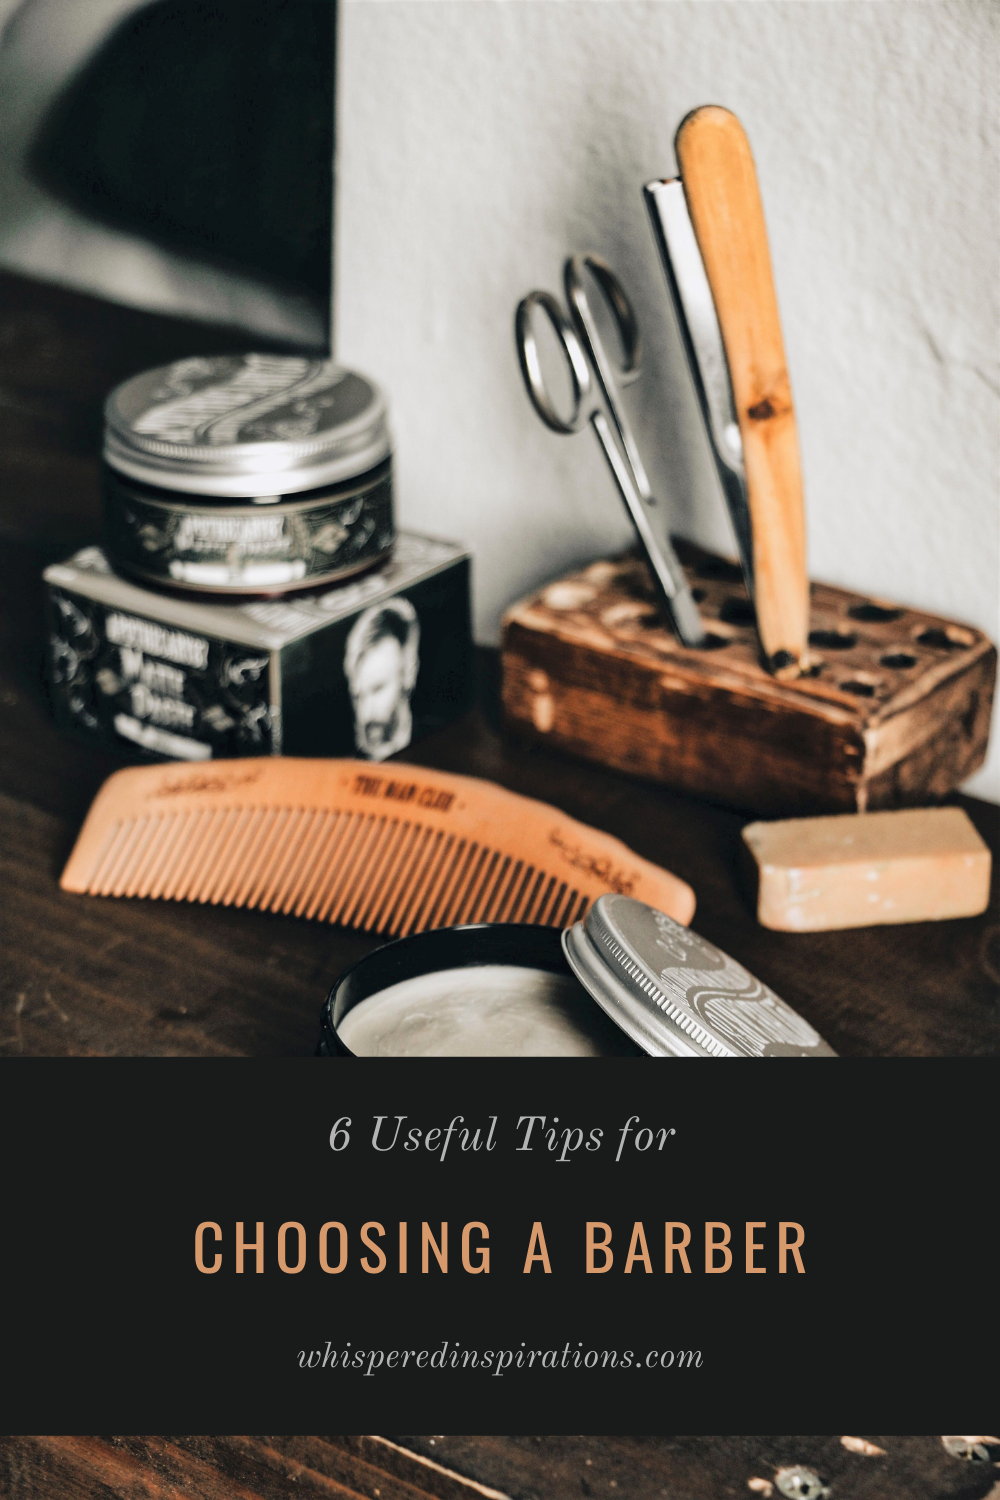 Tools of a barber are shown on a wooden table. Thera are scissors, pomade, brushes, and more. This article covers useful tips for choosing a barber.